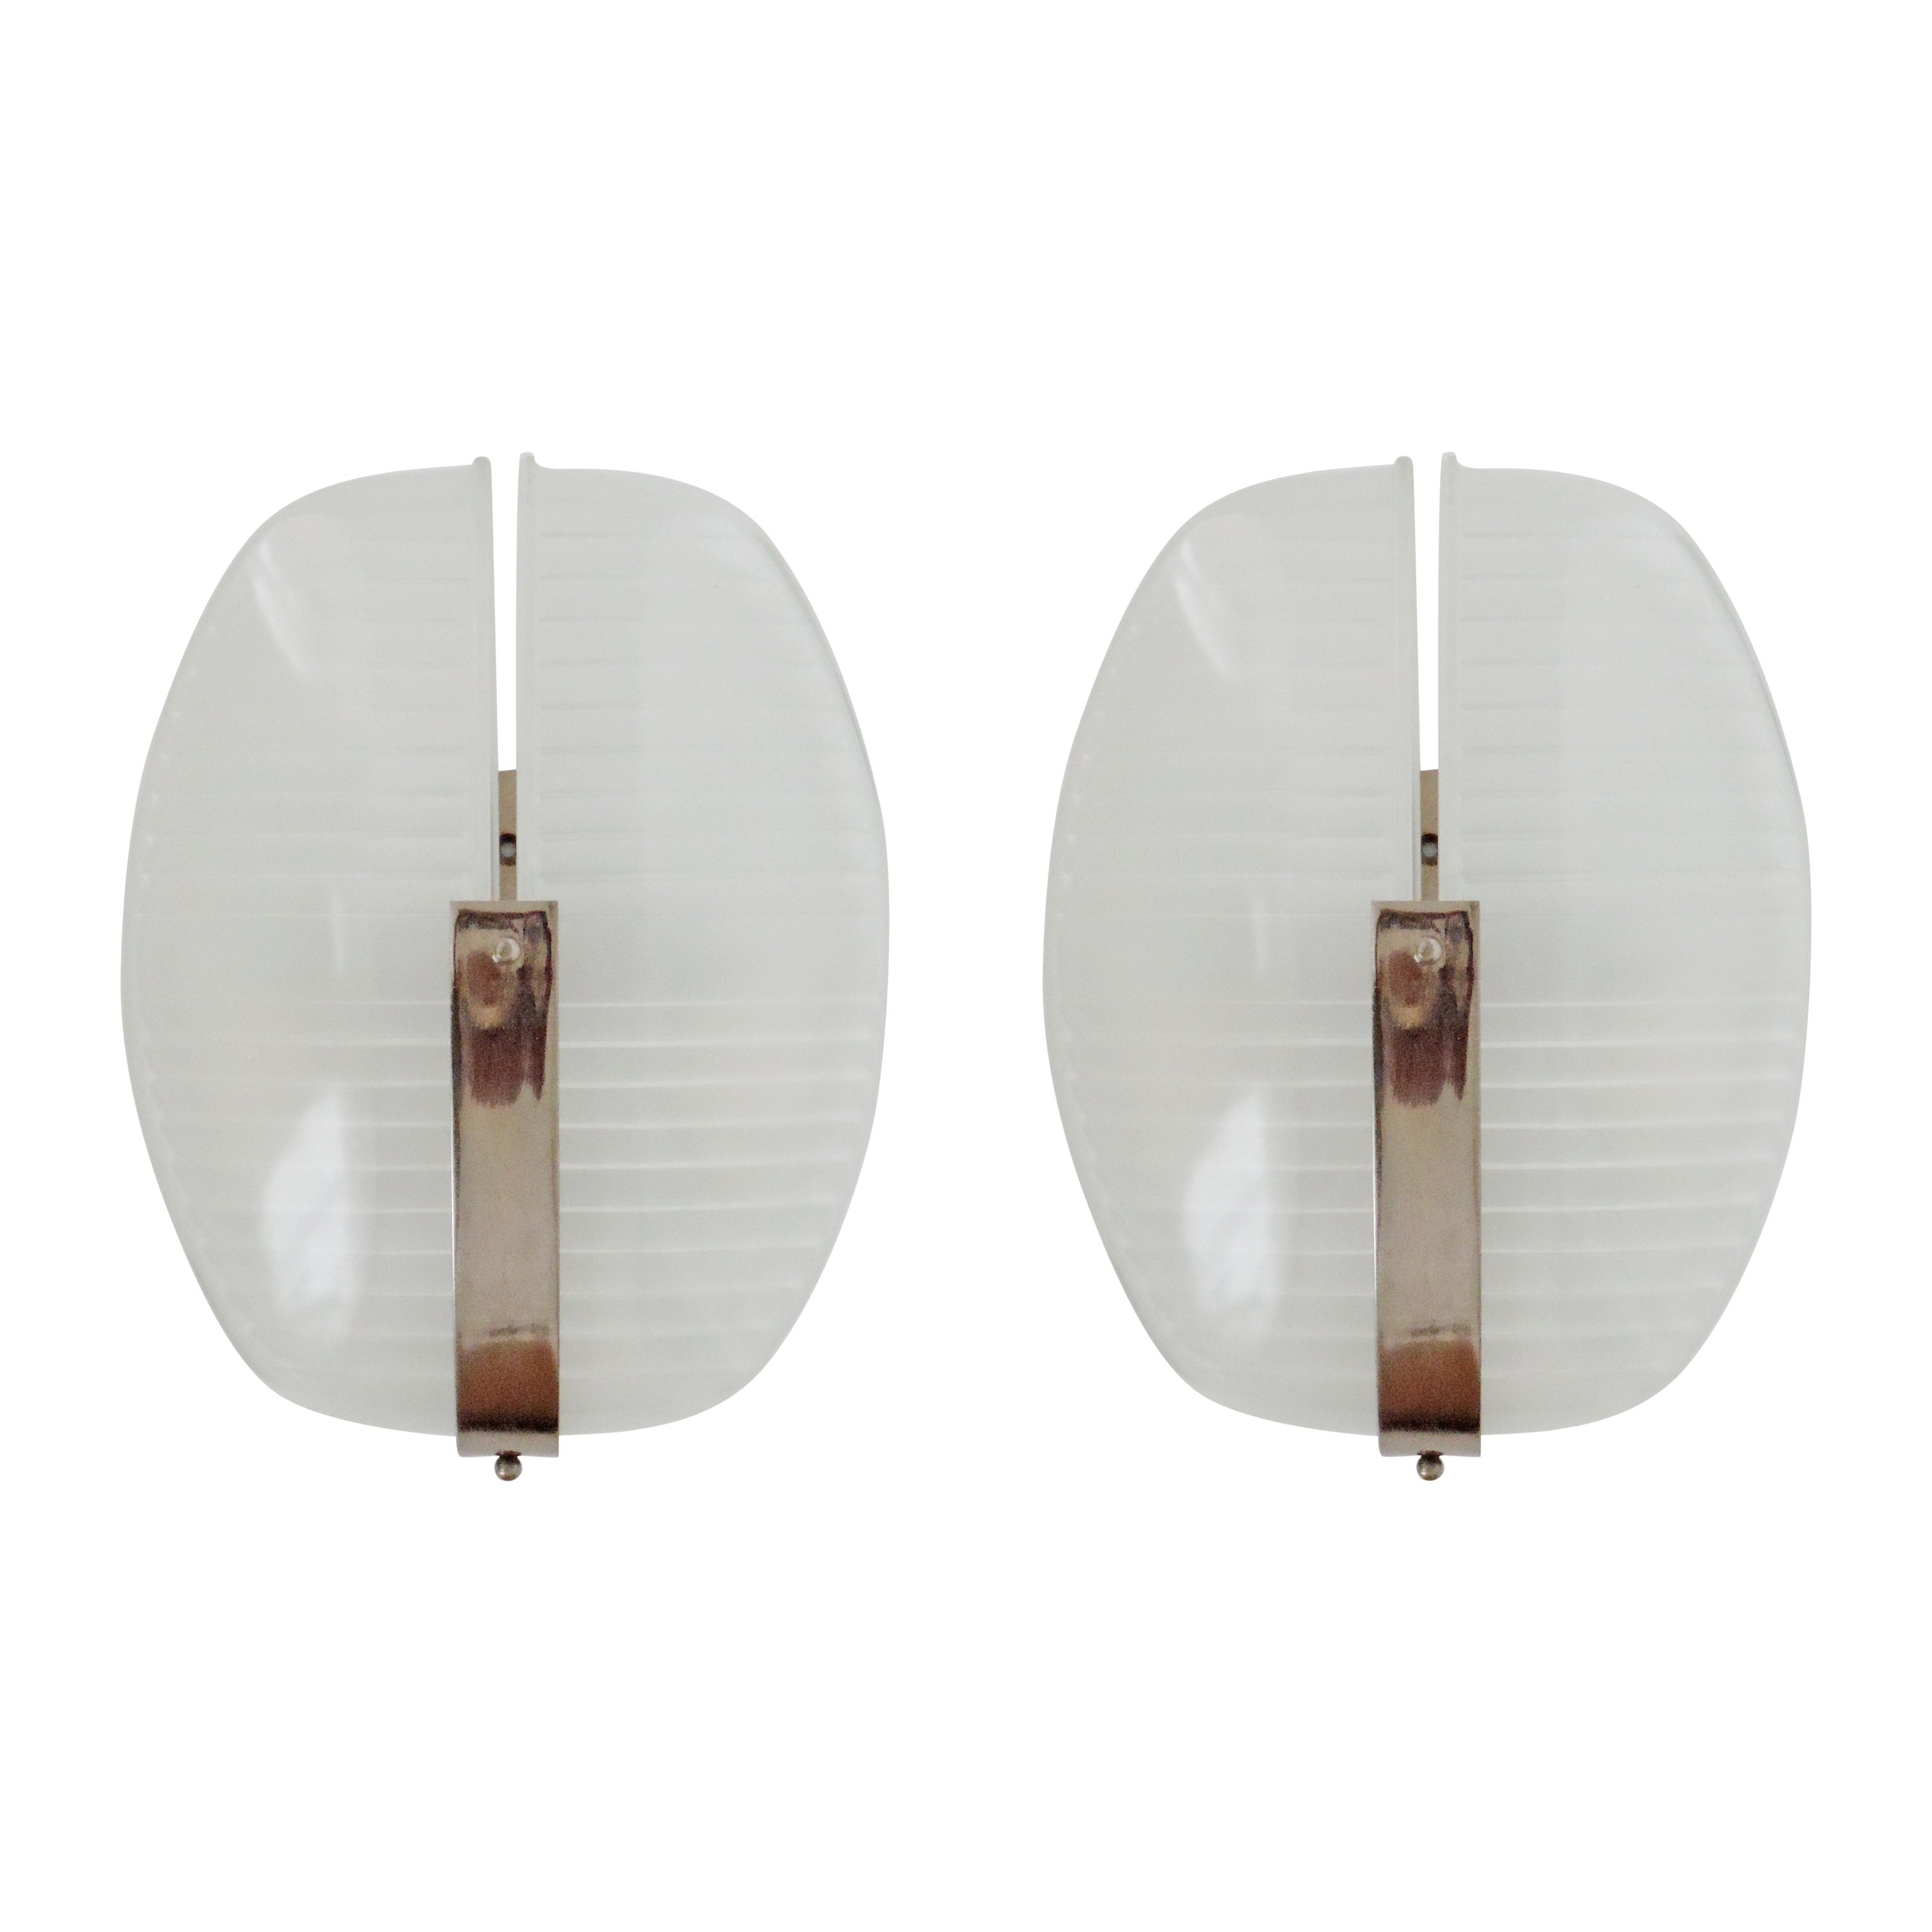 Vico Magistretti Pair of Lambda Wall Lights for Artemide, Italy, 1961 For Sale